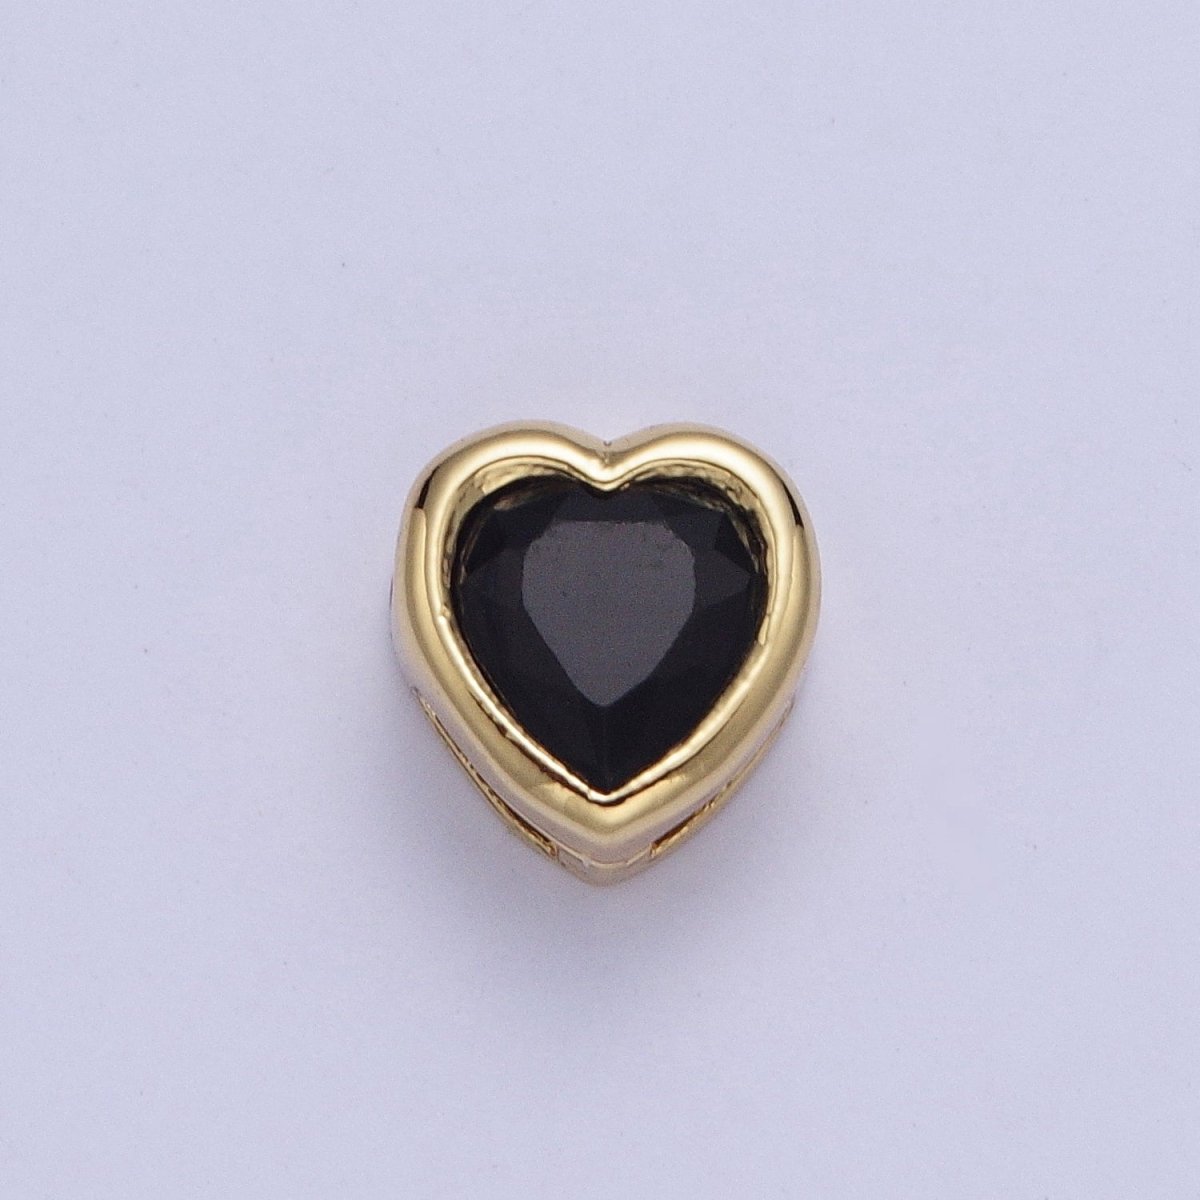 Colorful Cubiz Zirconia Heart Gold Bezel Beads - 7mm Dainty Bright 3D Love Jewelry Gold Filled Love Beads spacer for Bracelet Necklace Supply W-912-W-919 - DLUXCA